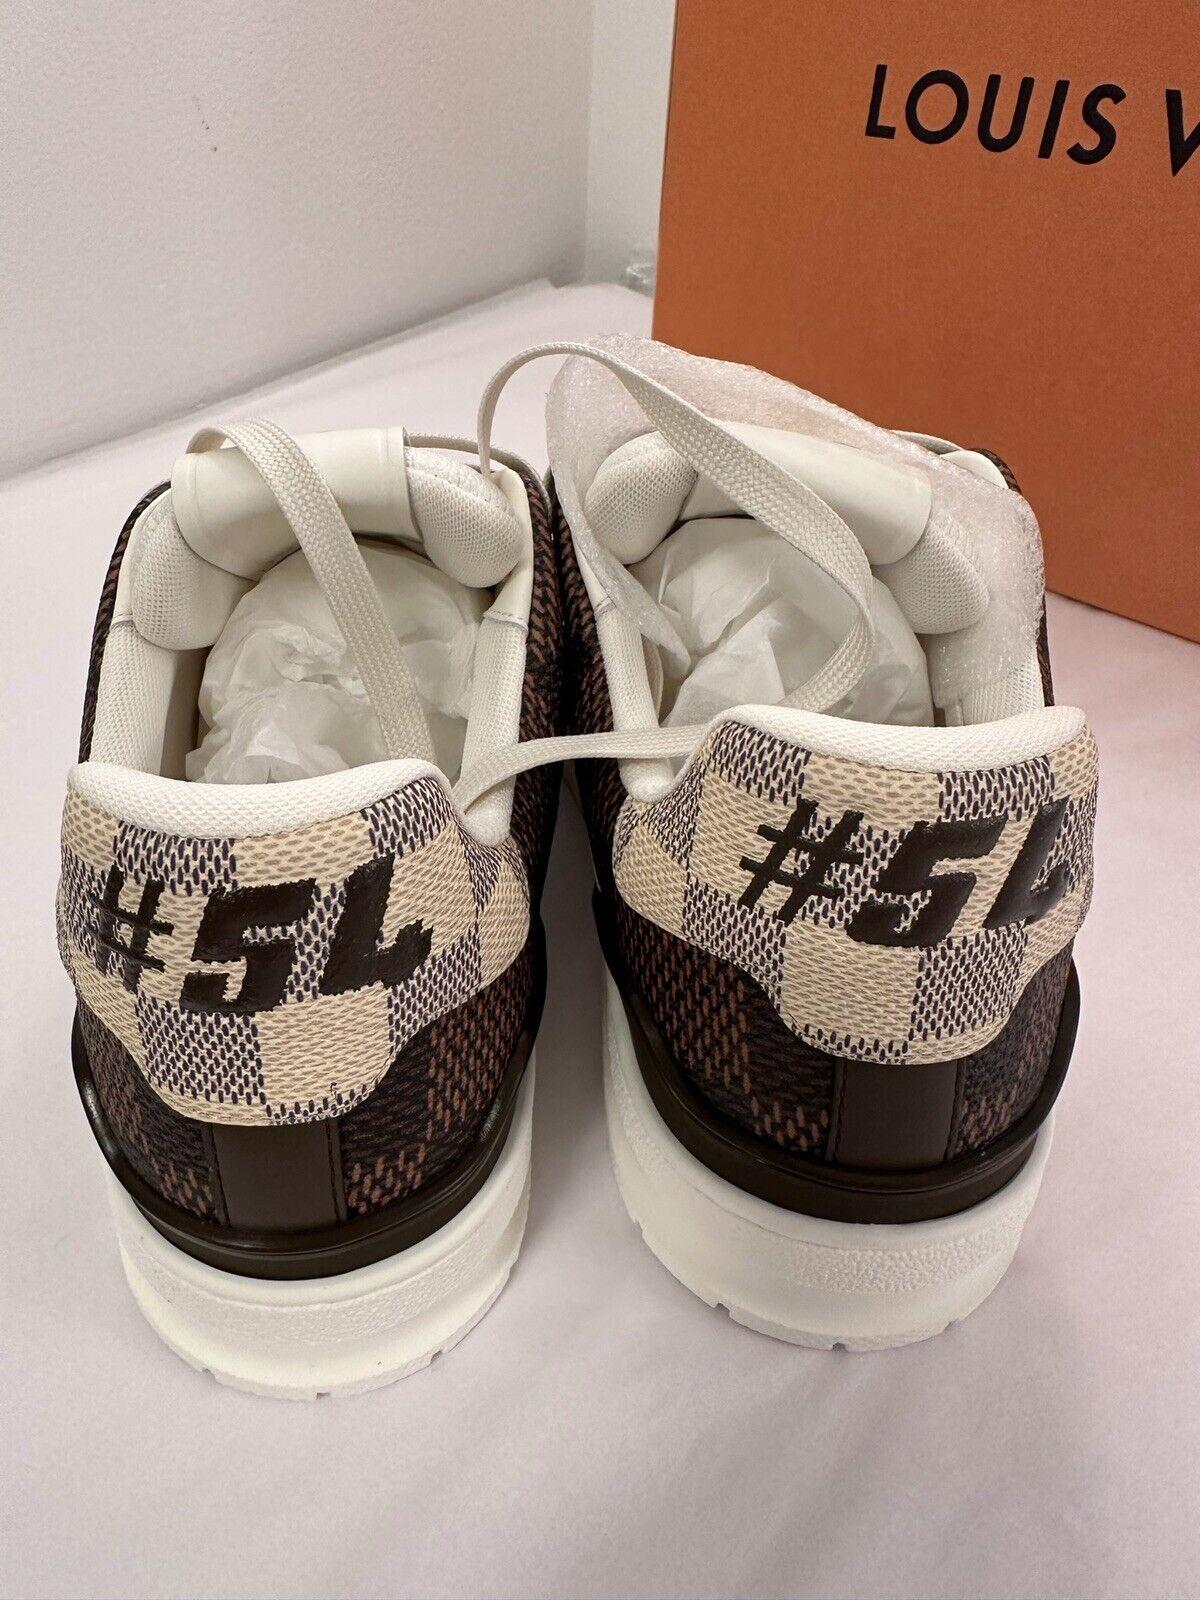 Beige Louis Vuitton Lv Trainer Damier Brand New Size 6 Sold Out!